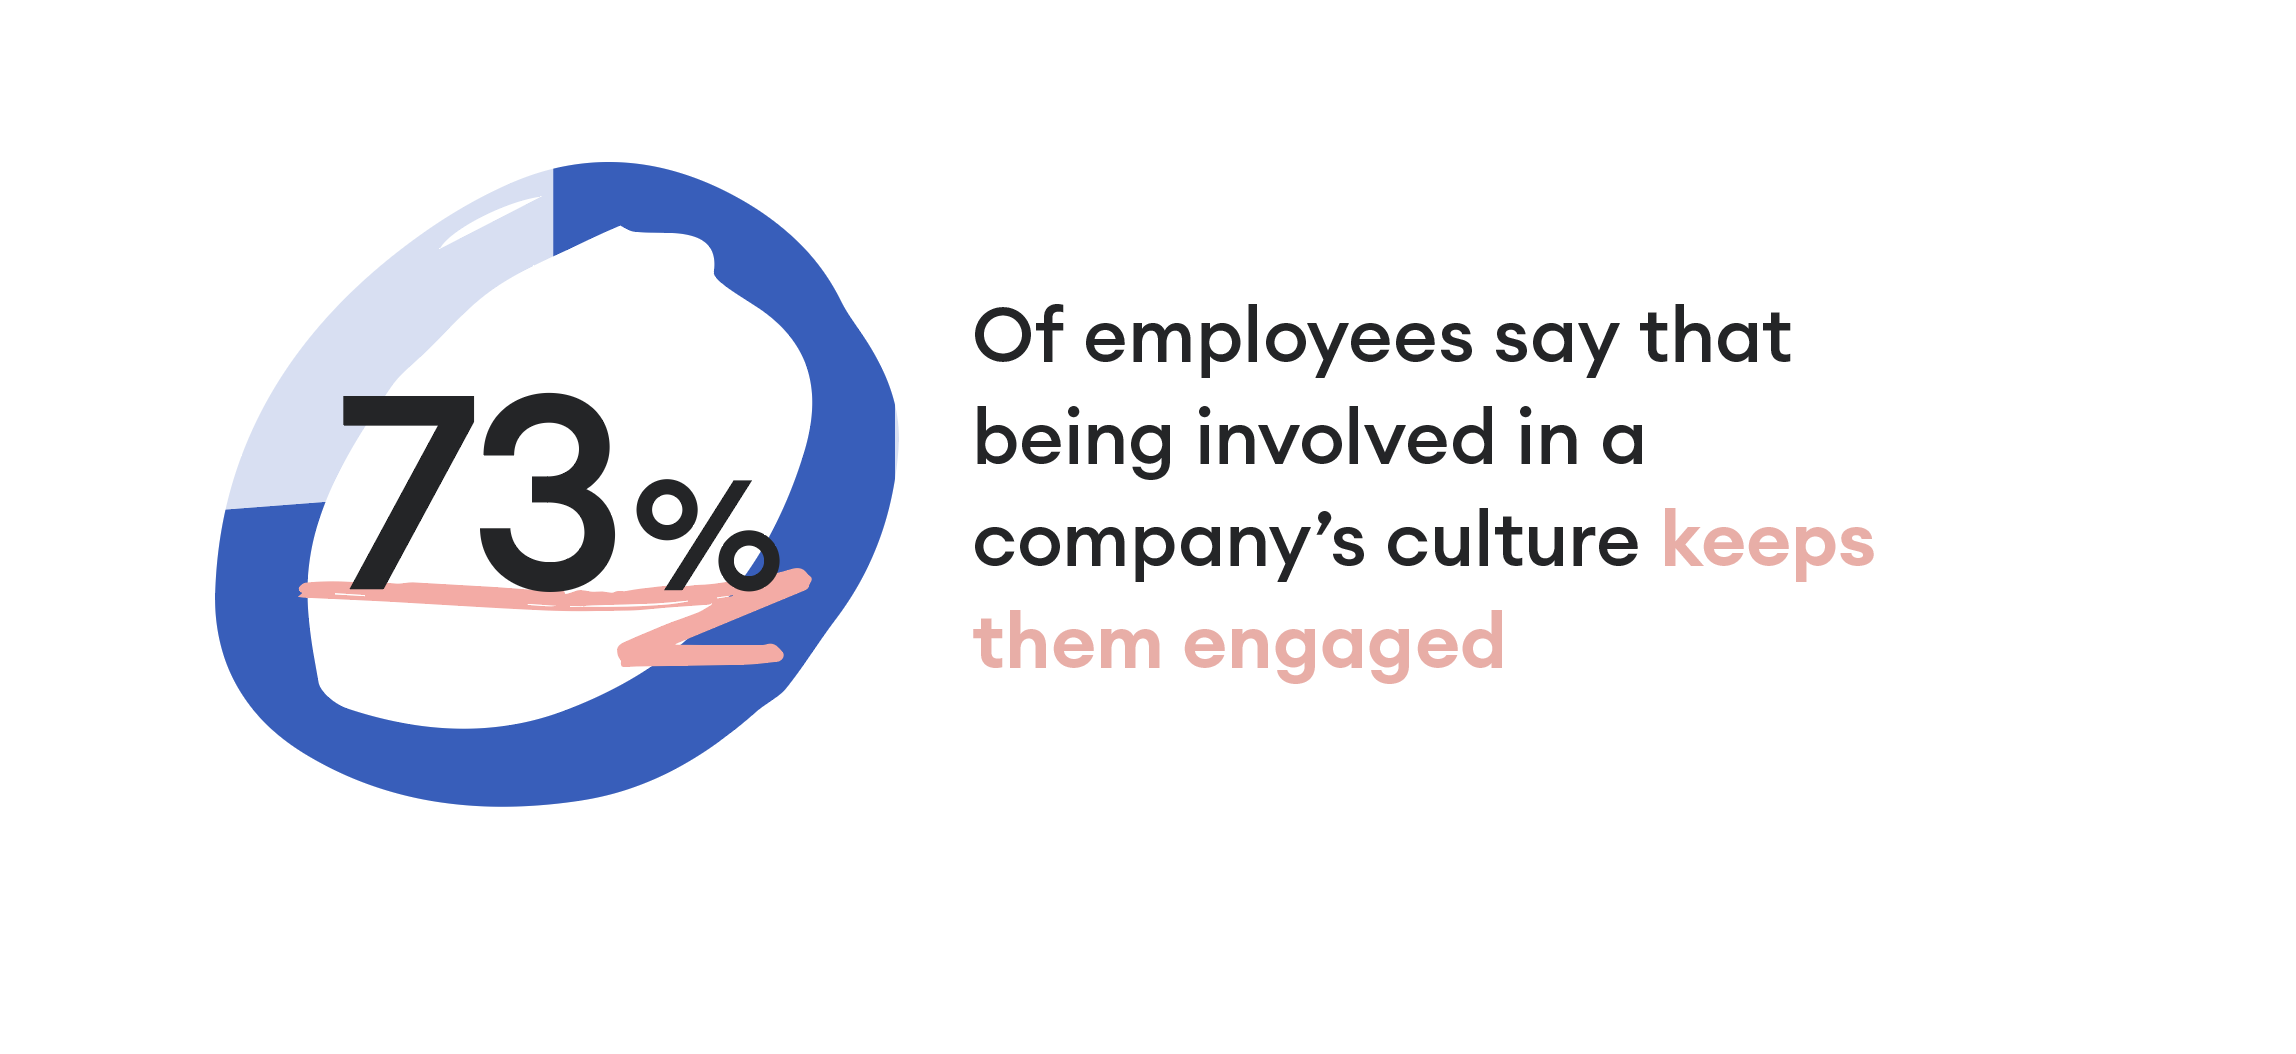 73% of employees says being involved in culture keeps them engaged